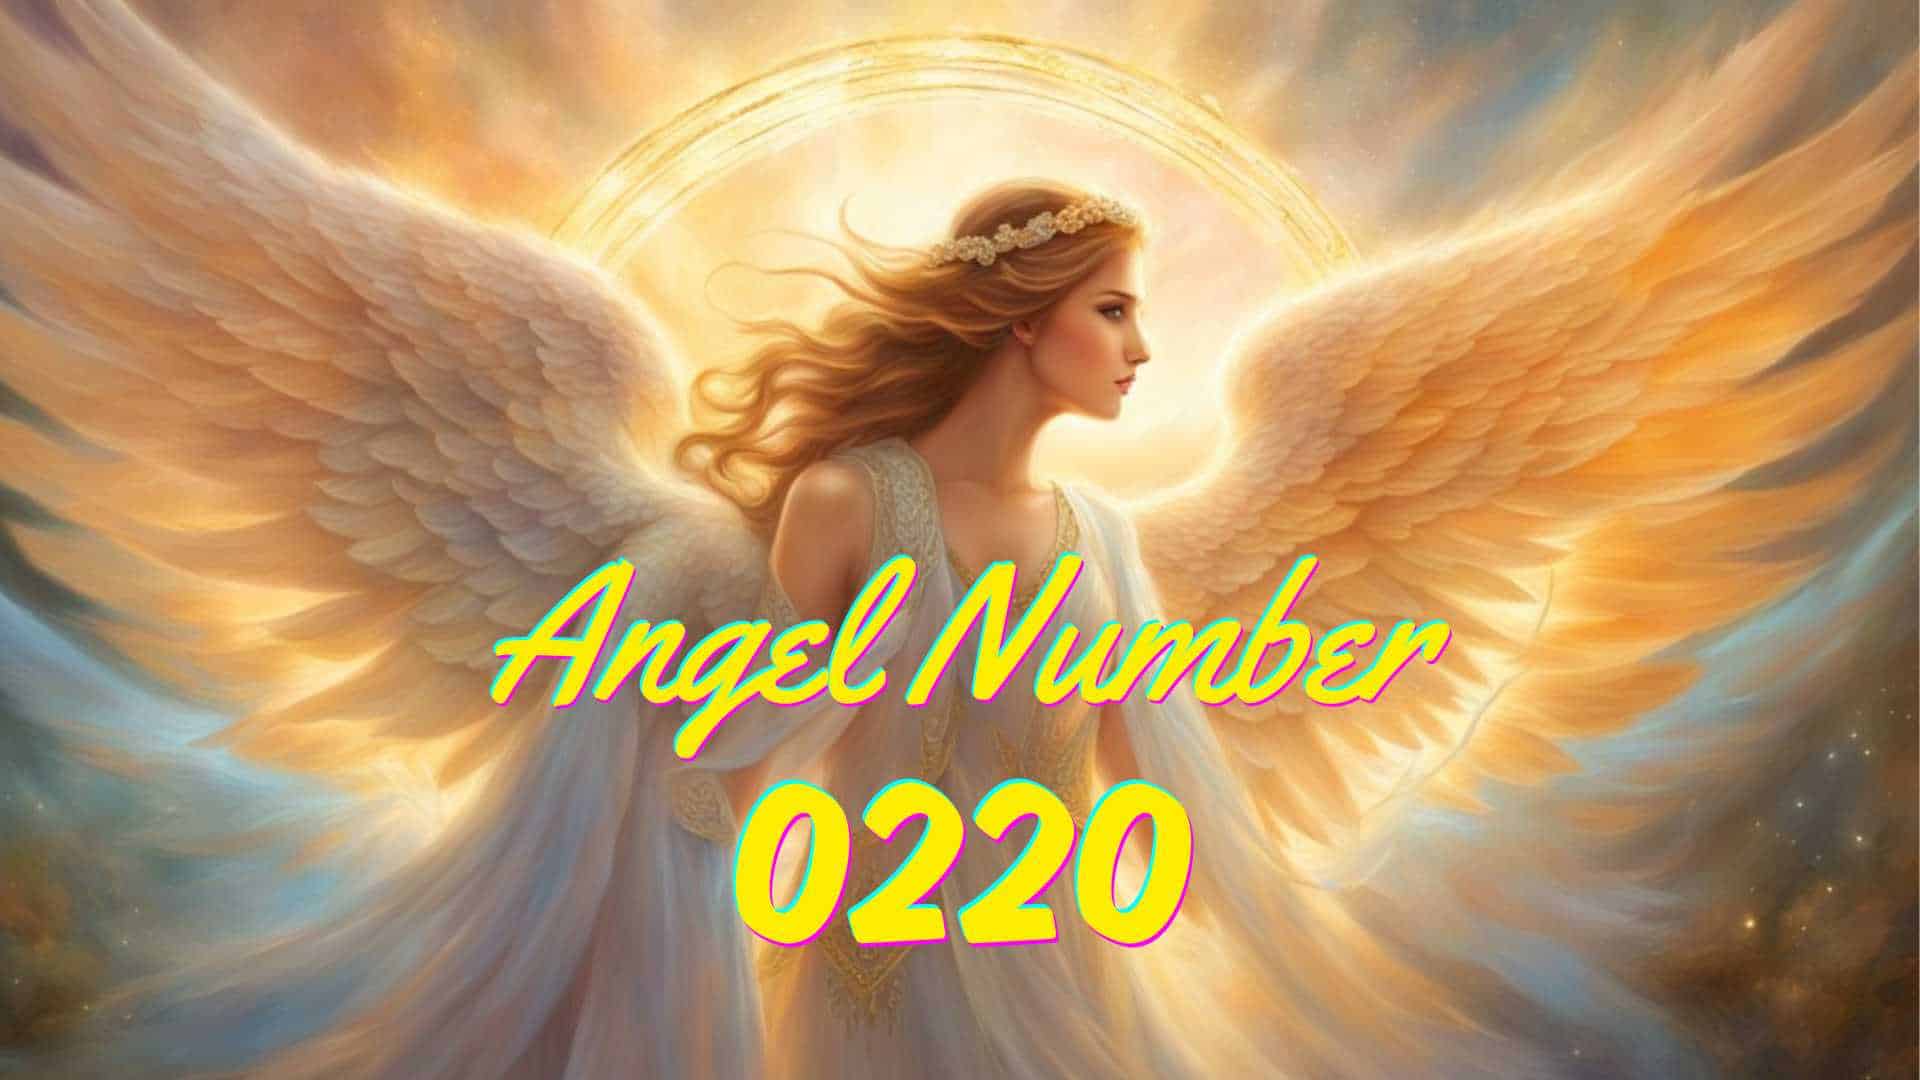 Angel Number 0220 – What Does it Mean?